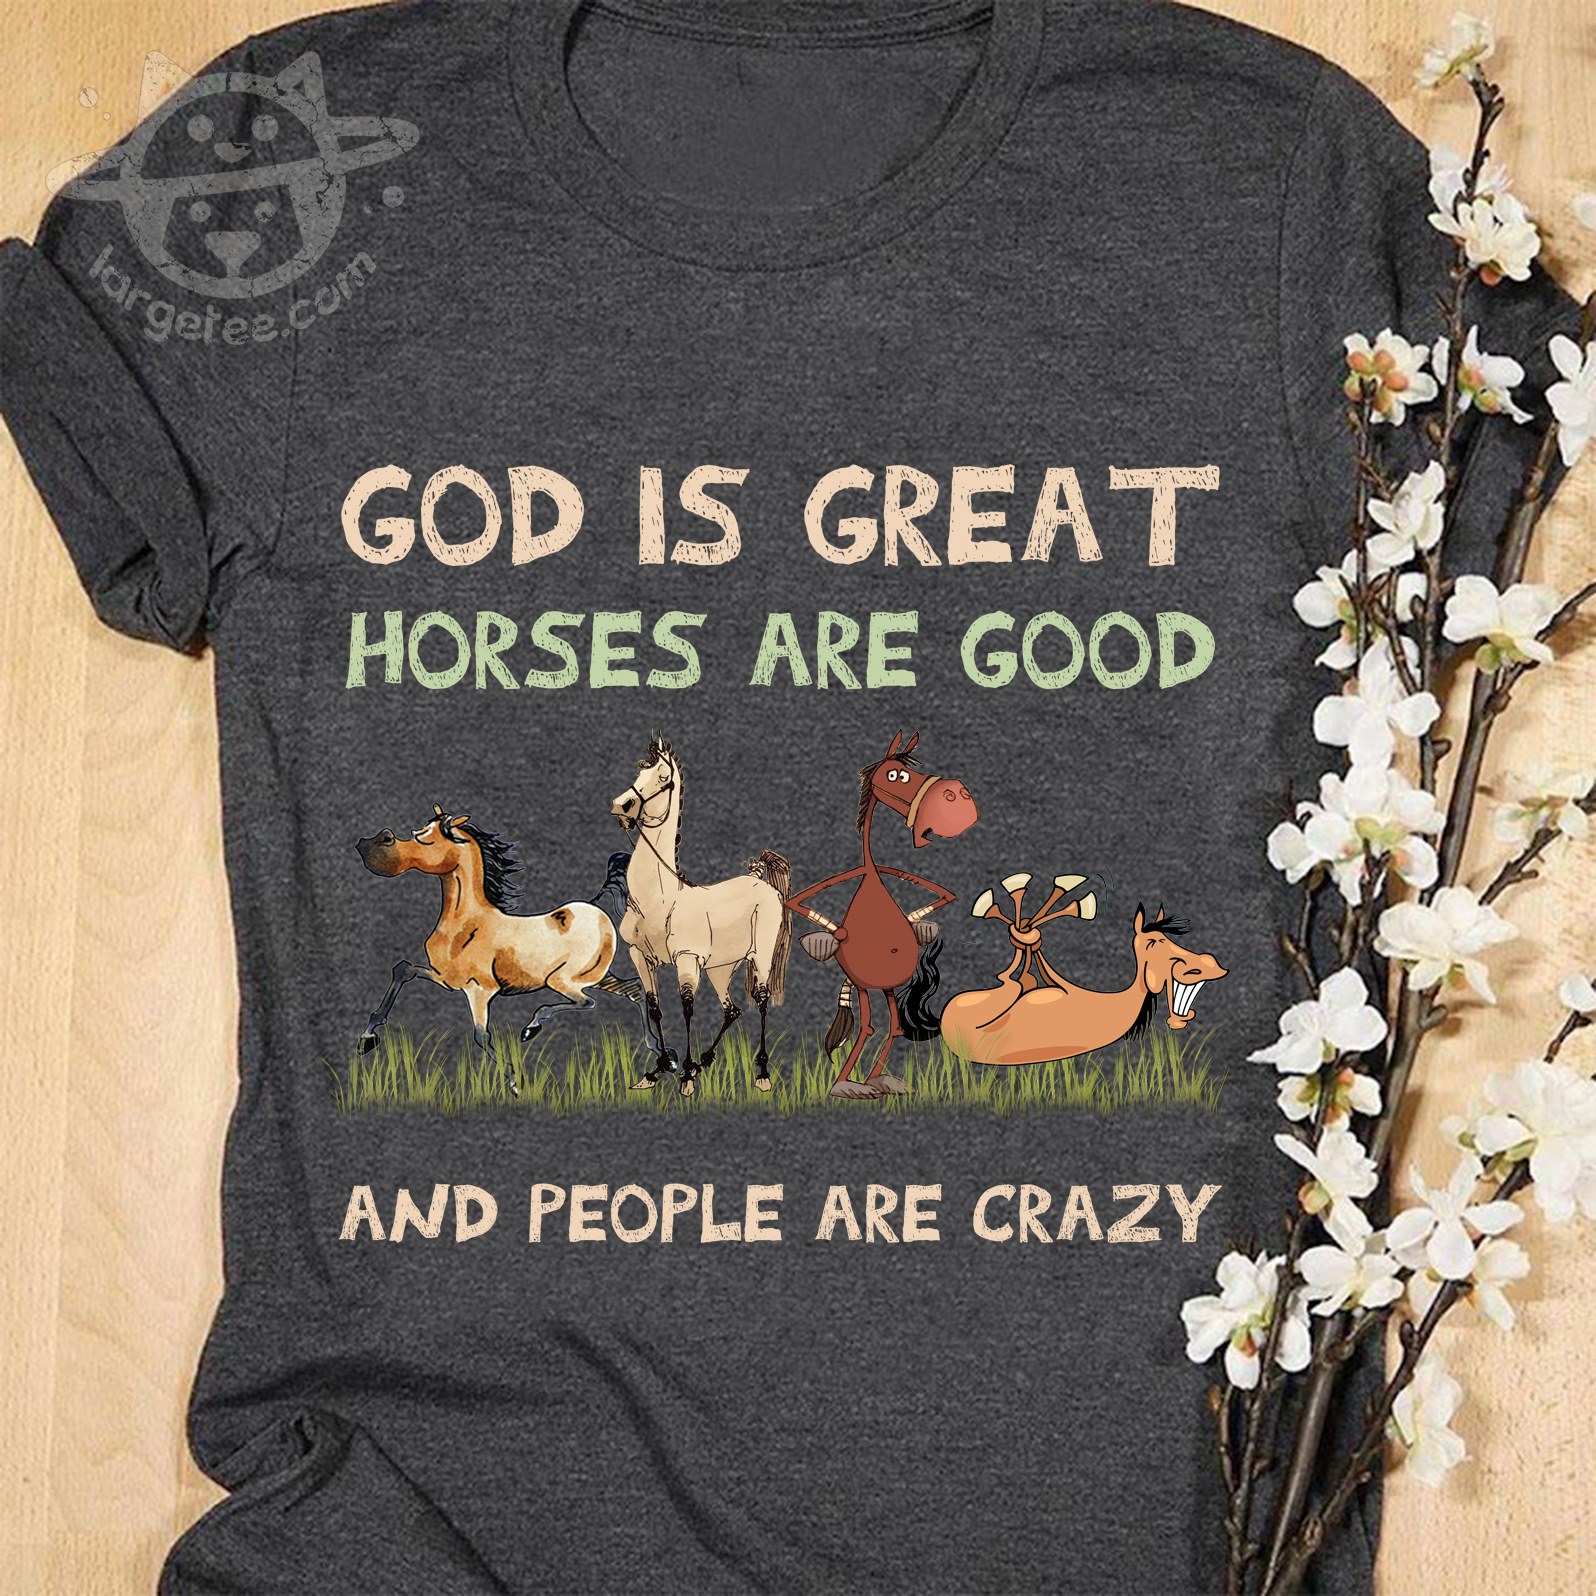 God is great horses are good and people are crazy - Grumpy horses